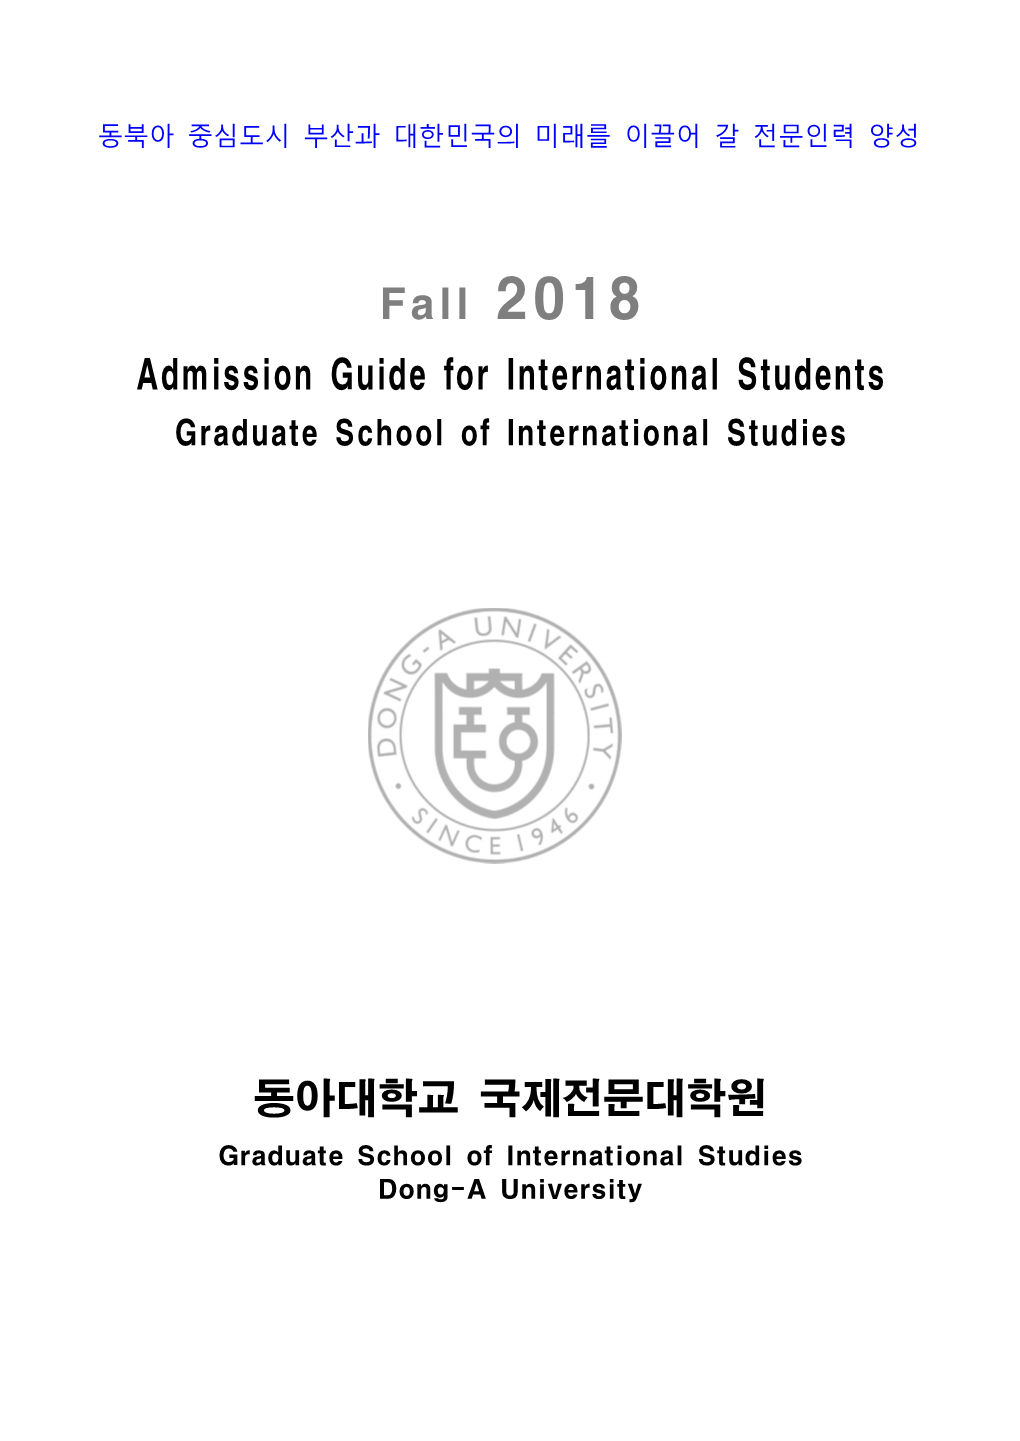 Fall 2018 Admission Guide for International Students 동아대학교